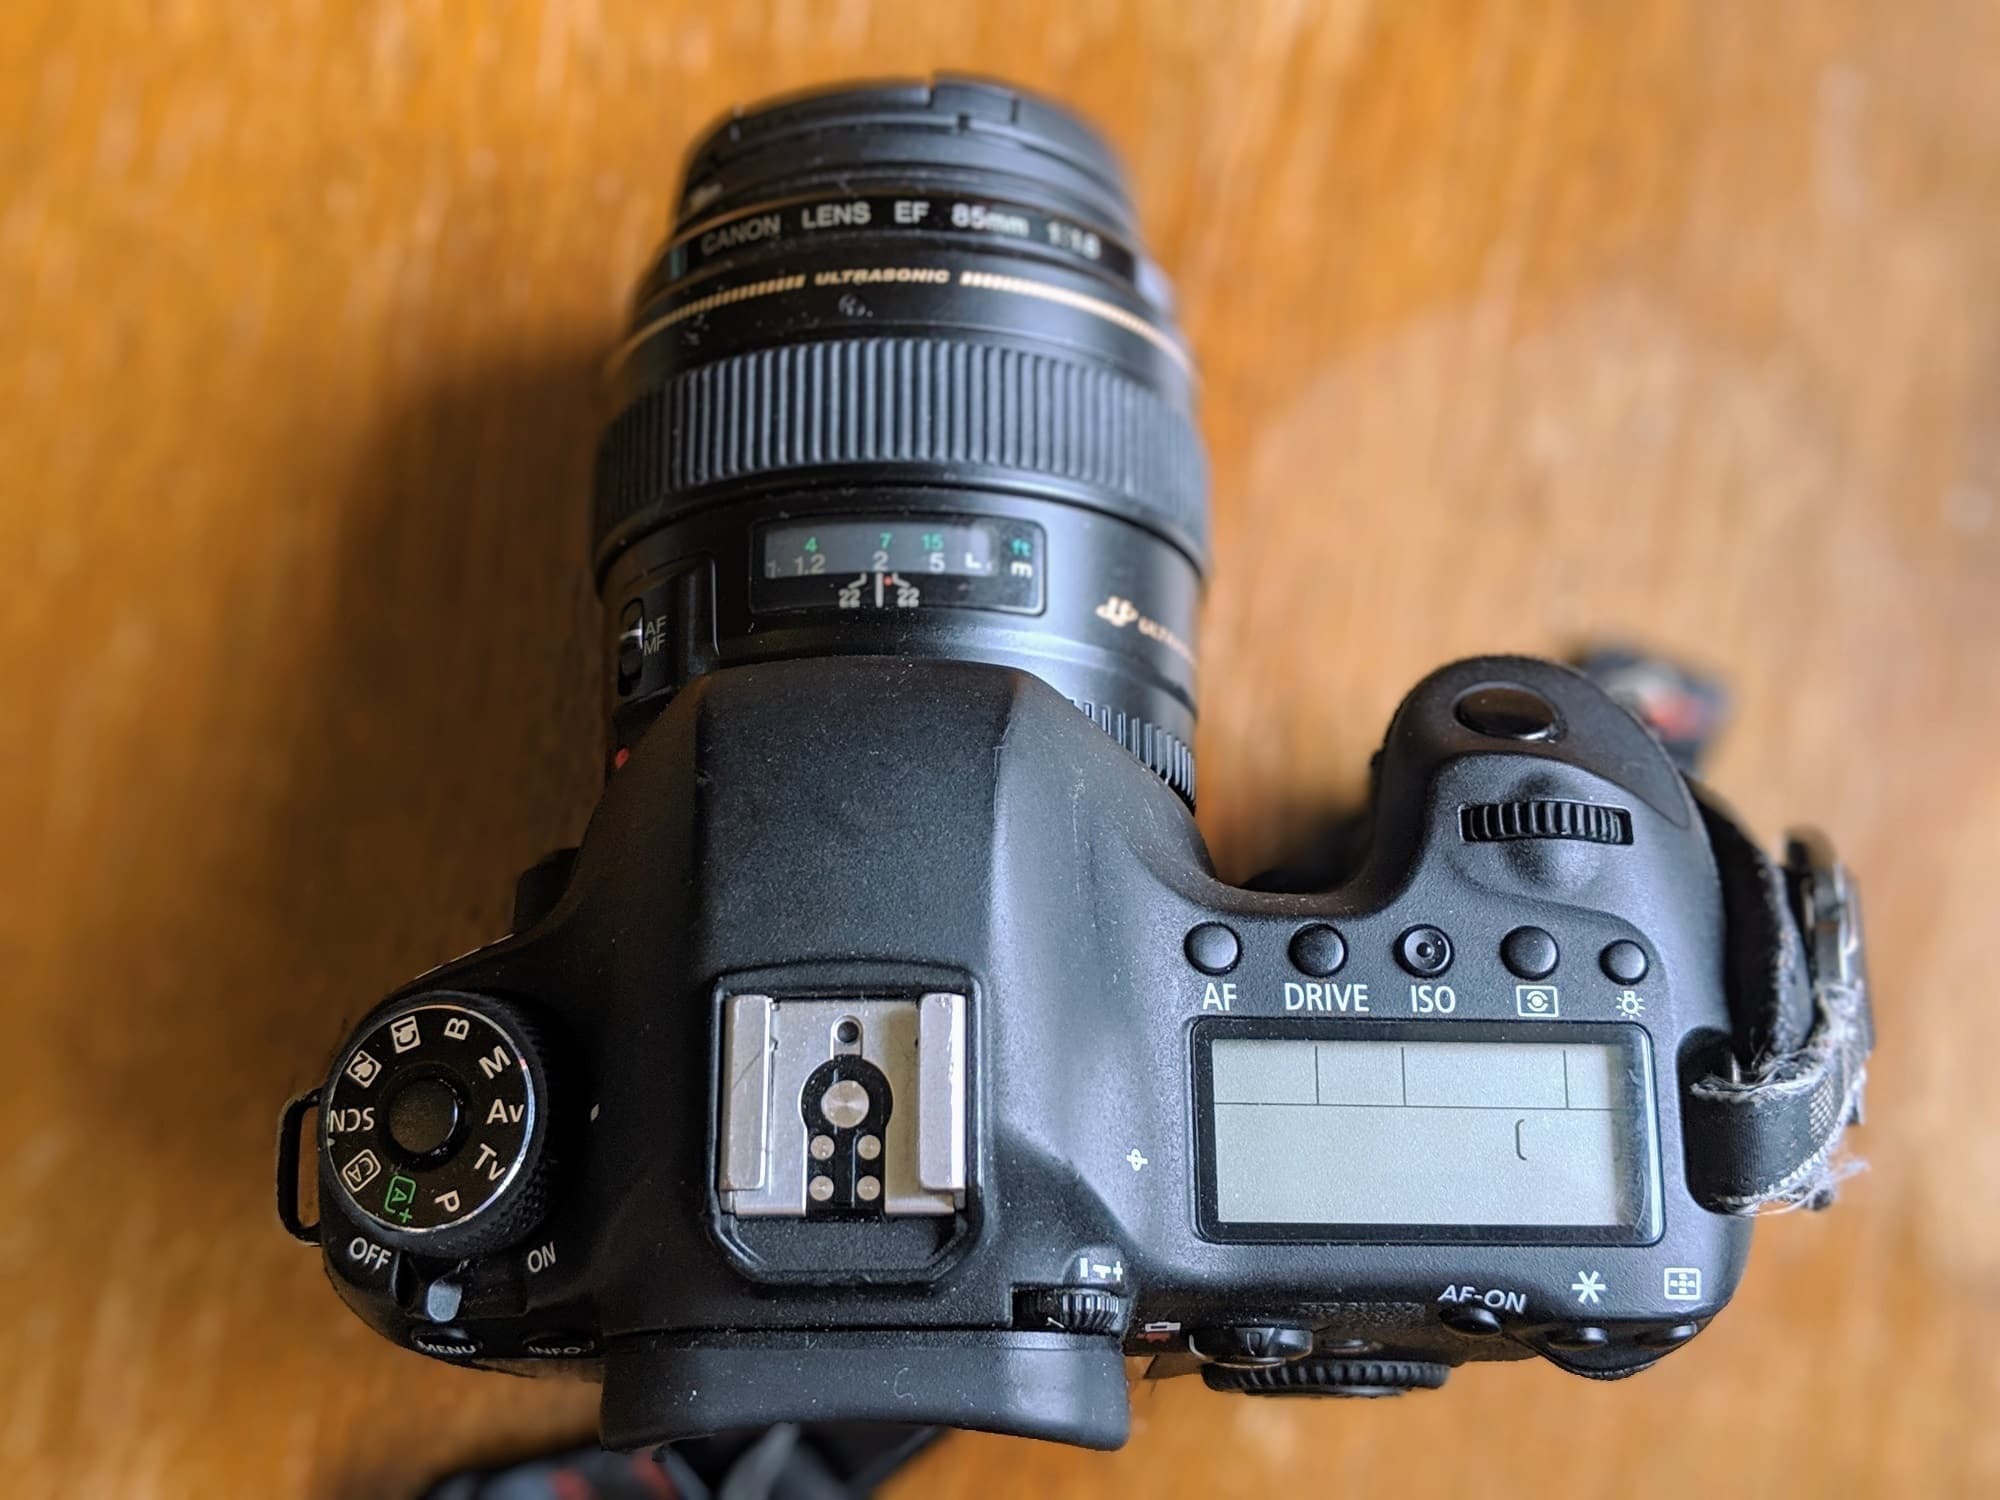 5 things you need to know about Canon's beginner-friendly 2000D and 4000D  DSLRs